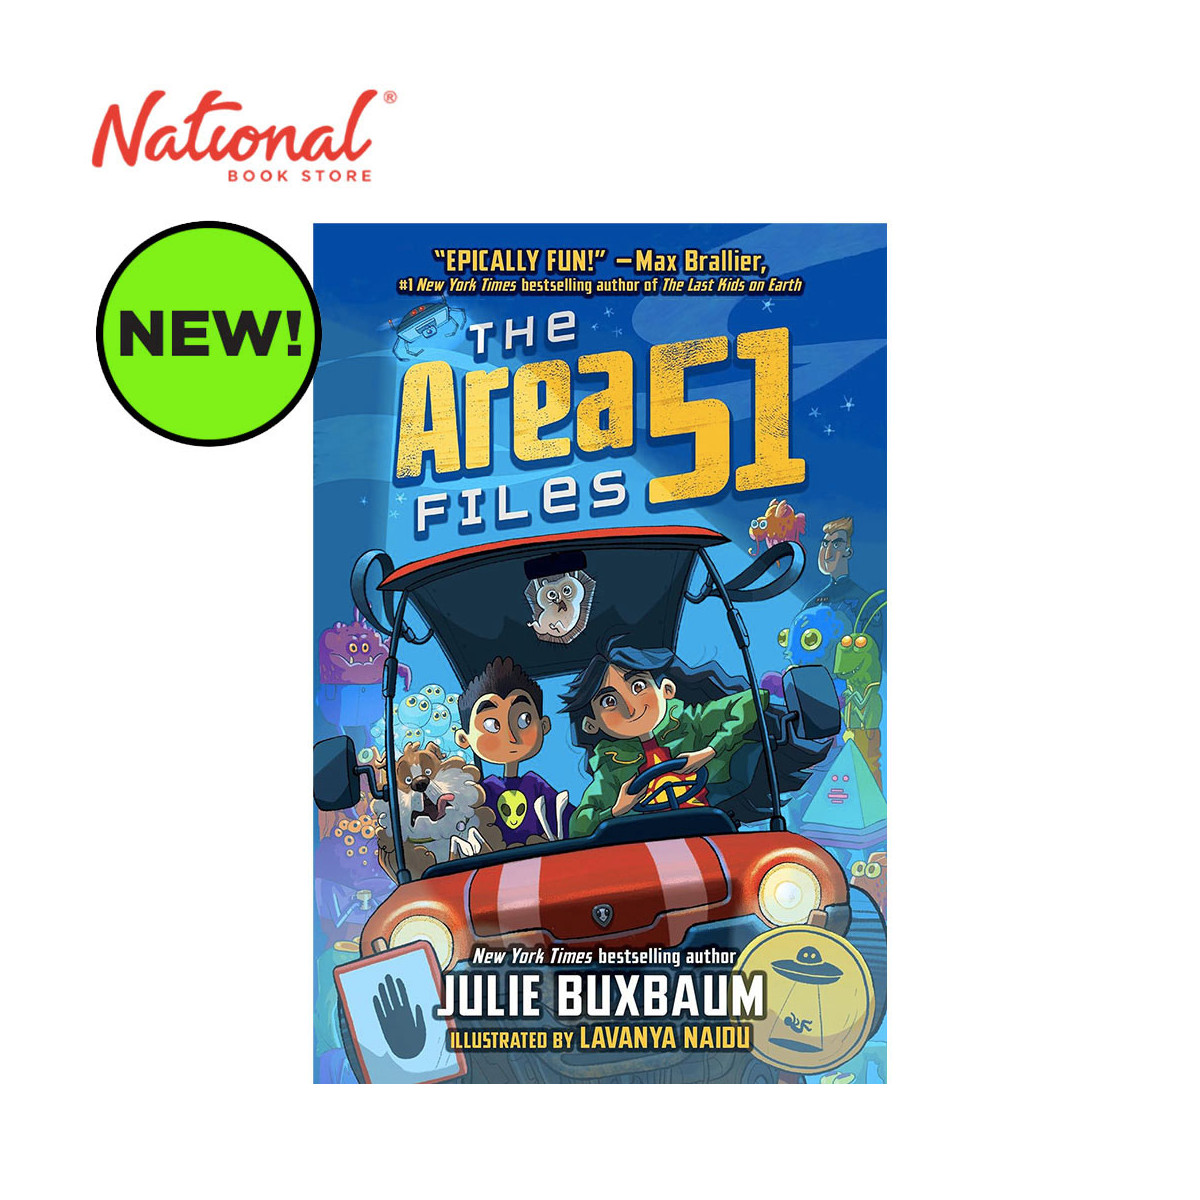 *PRE-ORDER* The Area 51 Files By Julie Buxbaum - Trade Paperback - Children's Fiction